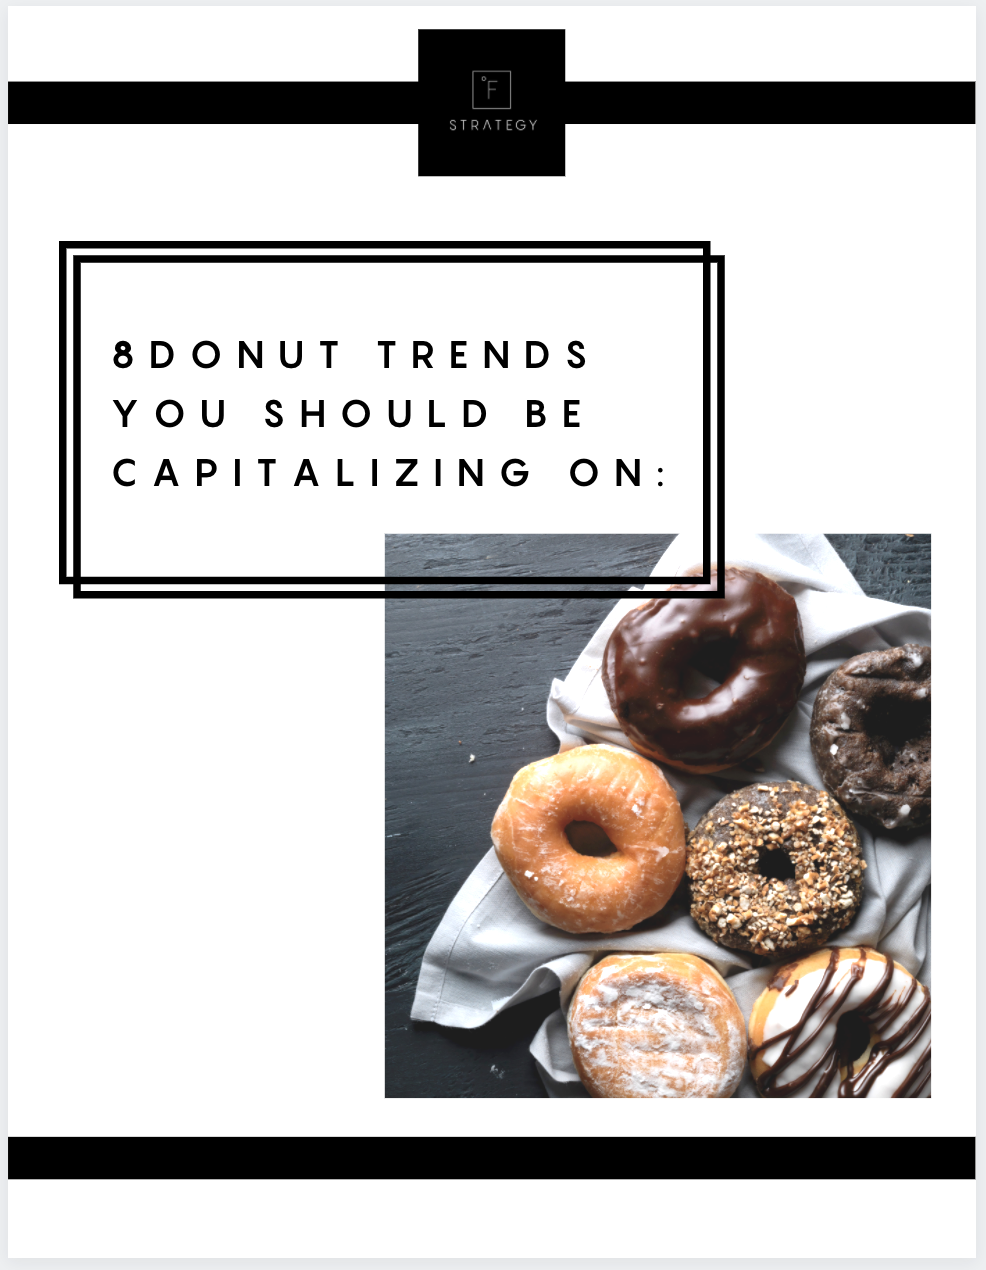 8 donut trends retailers should capitalize on